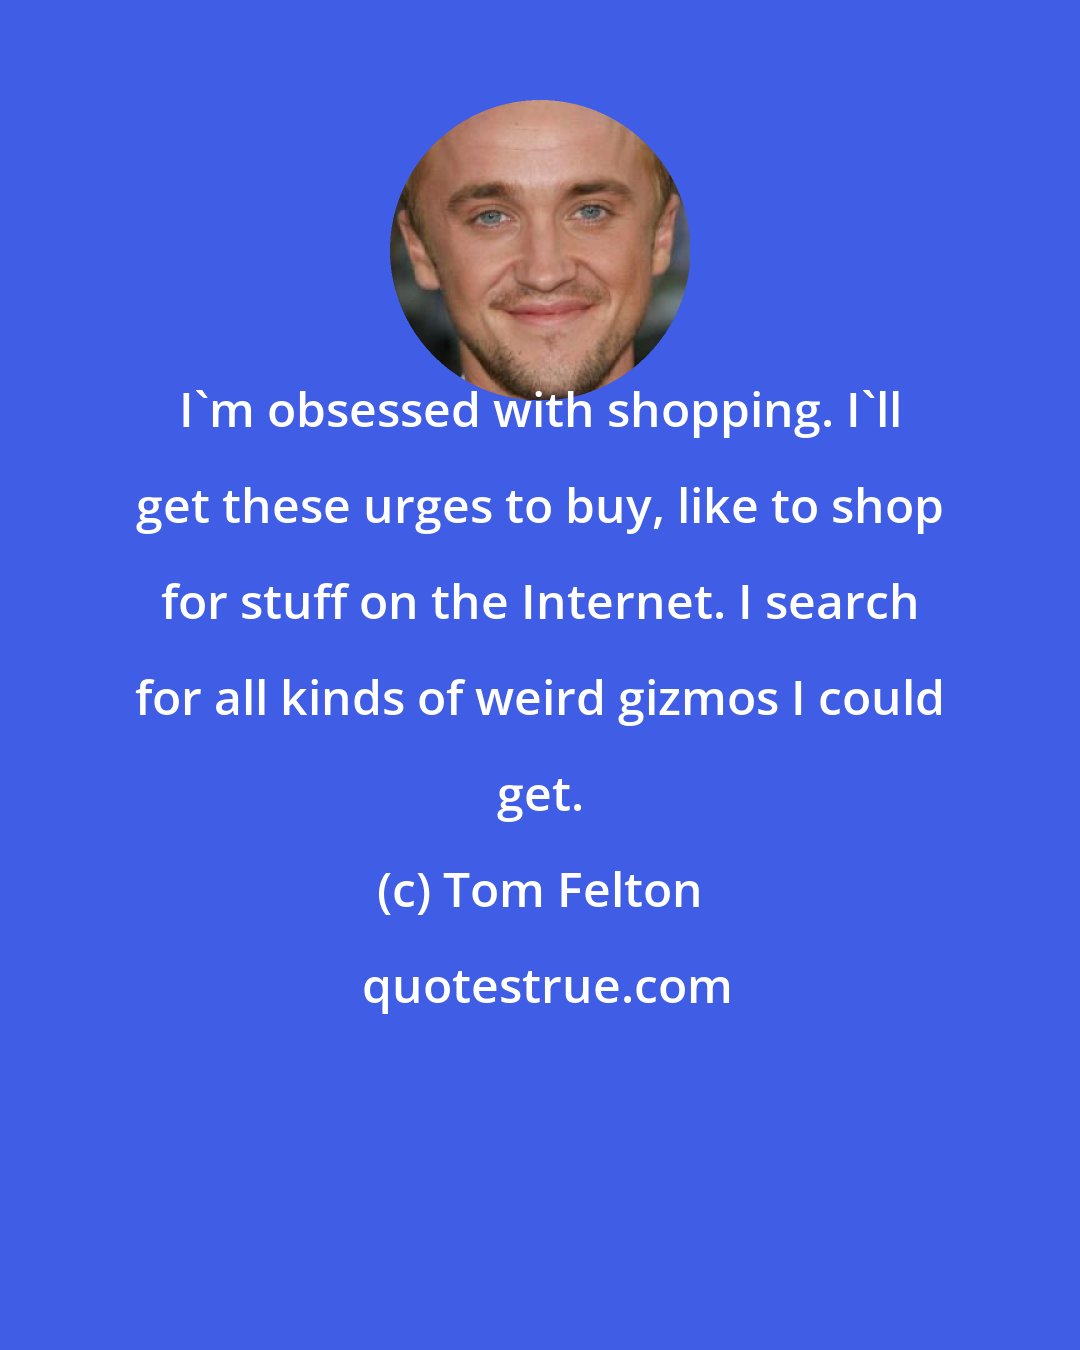 Tom Felton: I'm obsessed with shopping. I'll get these urges to buy, like to shop for stuff on the Internet. I search for all kinds of weird gizmos I could get.